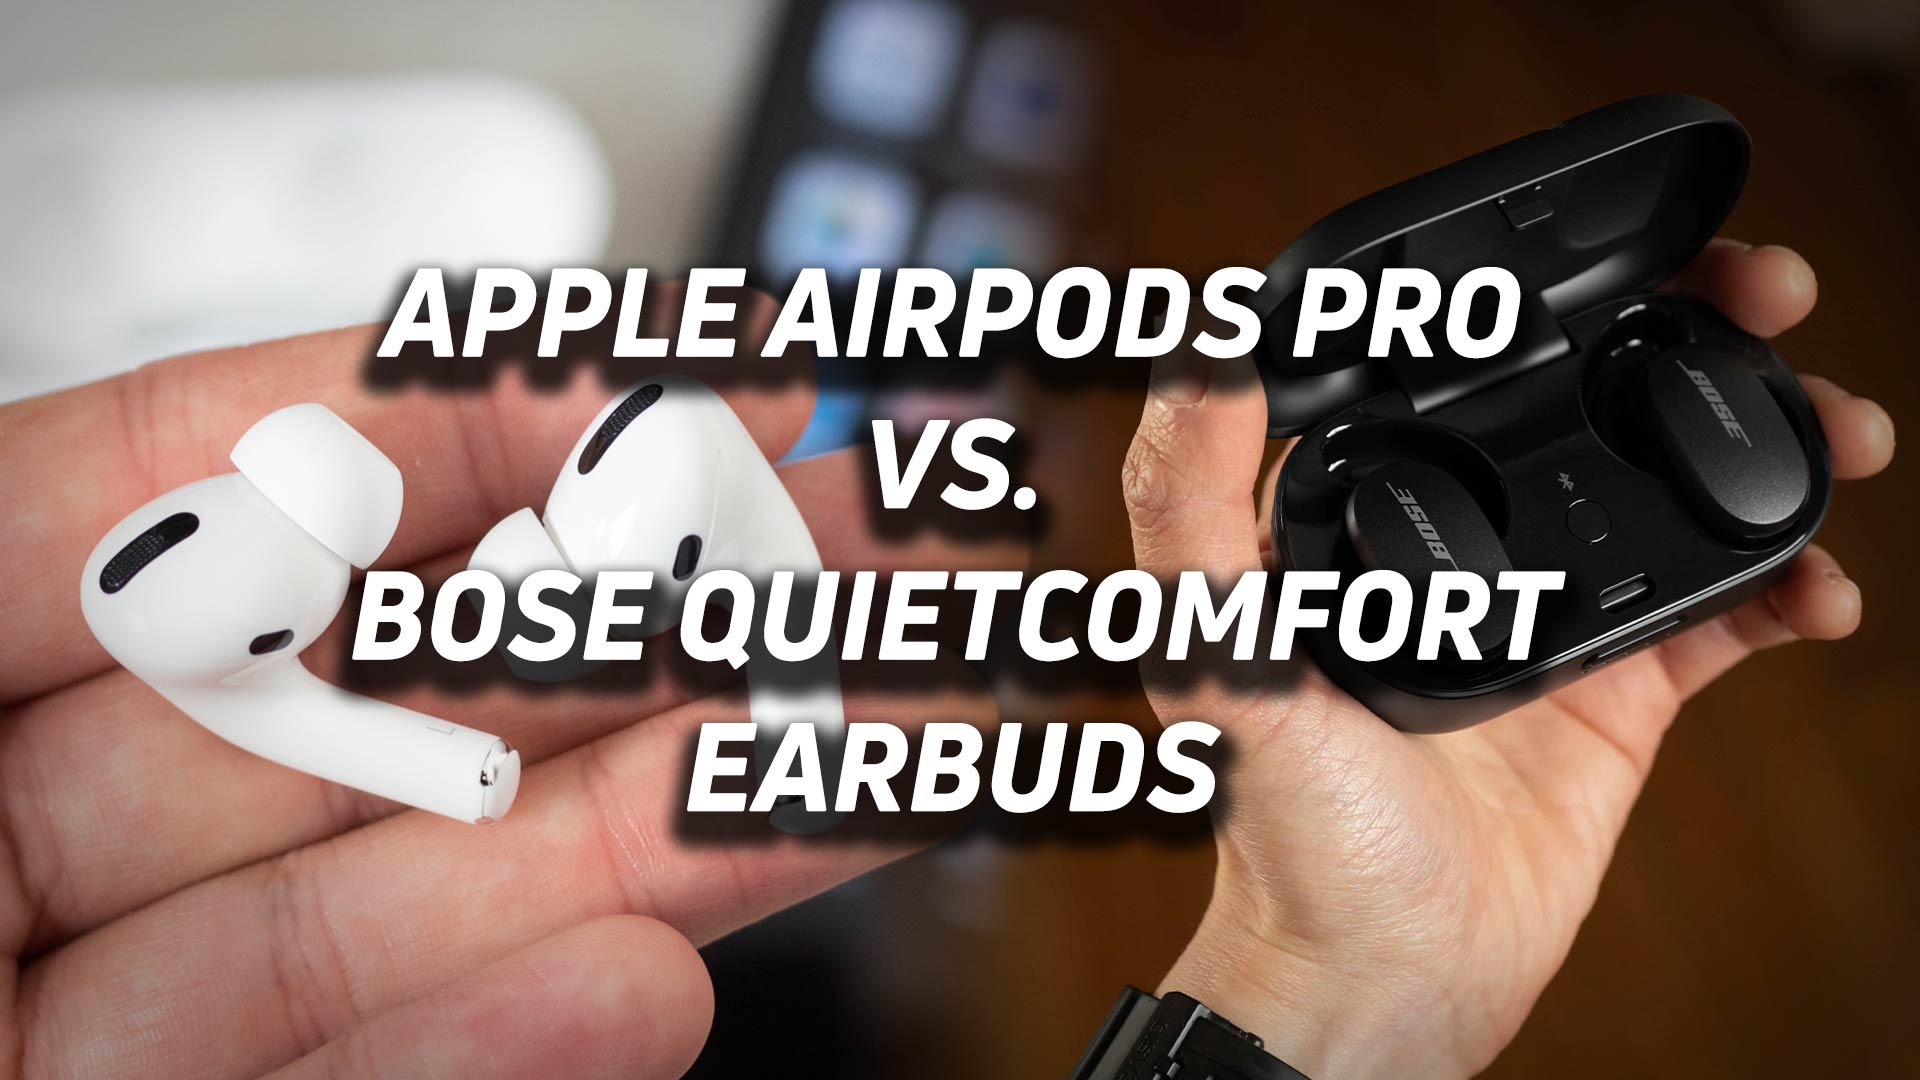 AirPods Pro generation) vs Bose Earbuds - SoundGuys